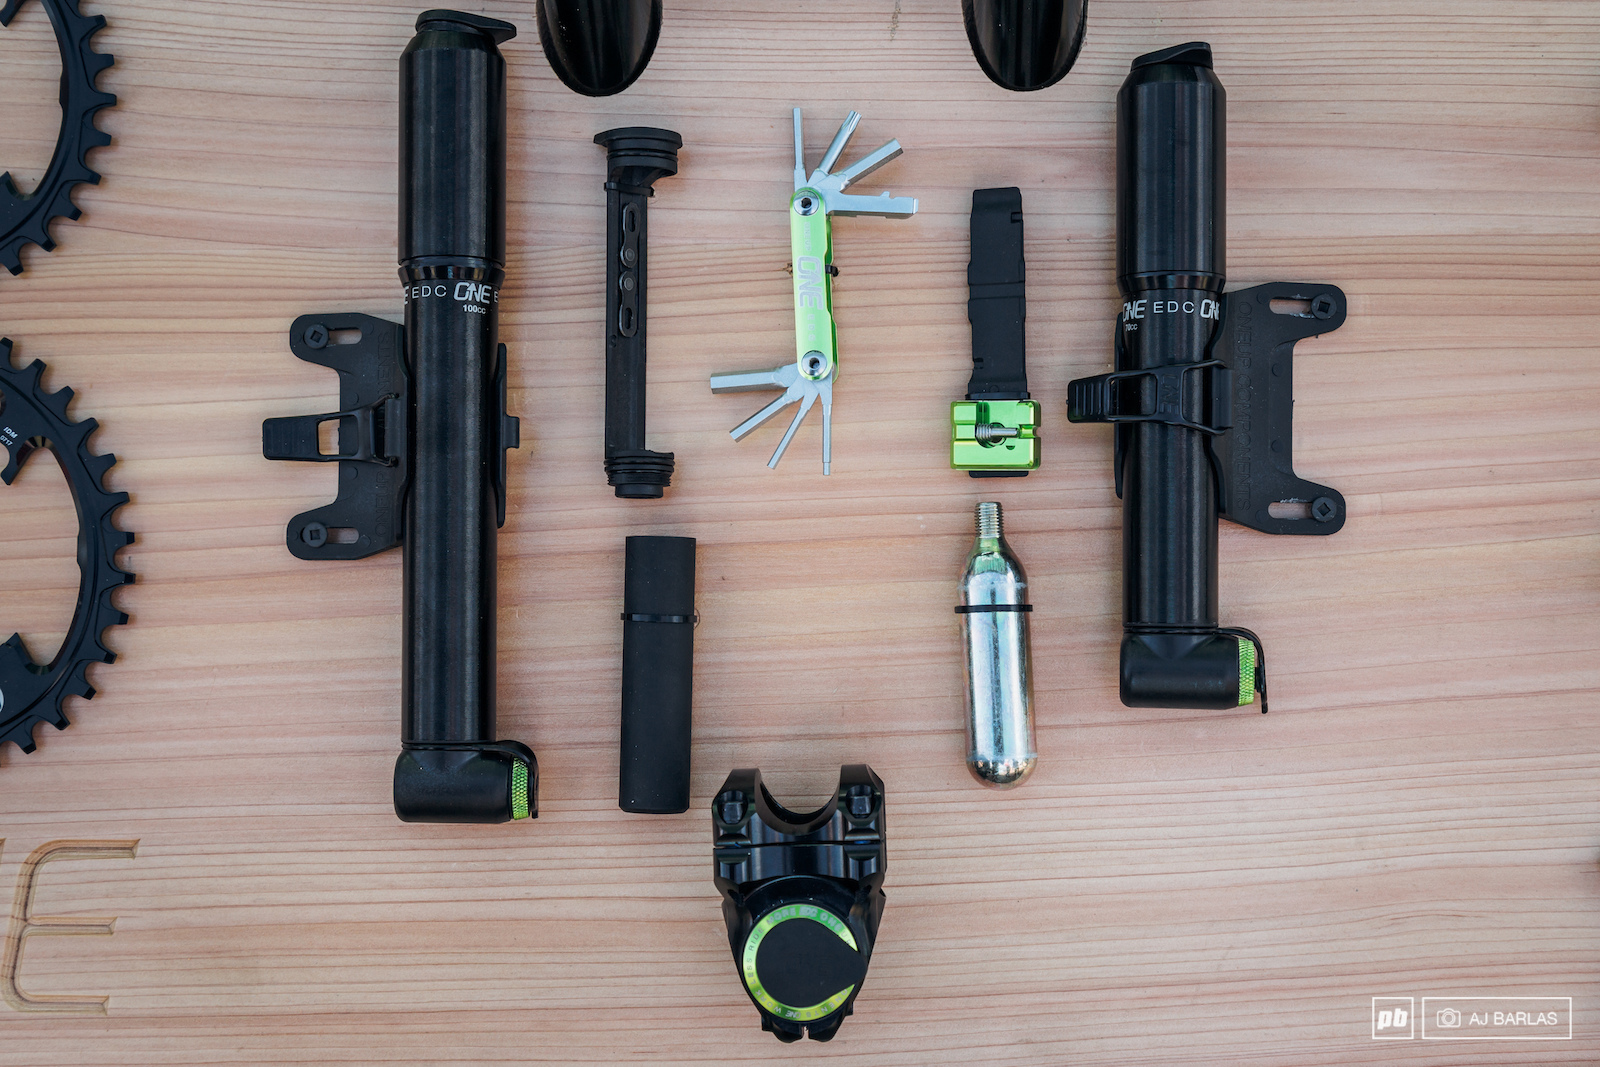 OneUp Components EDC (Everyday Carry) tool, all of it's parts, which include tire levers, a multi tool, C02 and chain tool, as well as the high volume pumps that they are now producing too, which also integrate with the EDC tool.